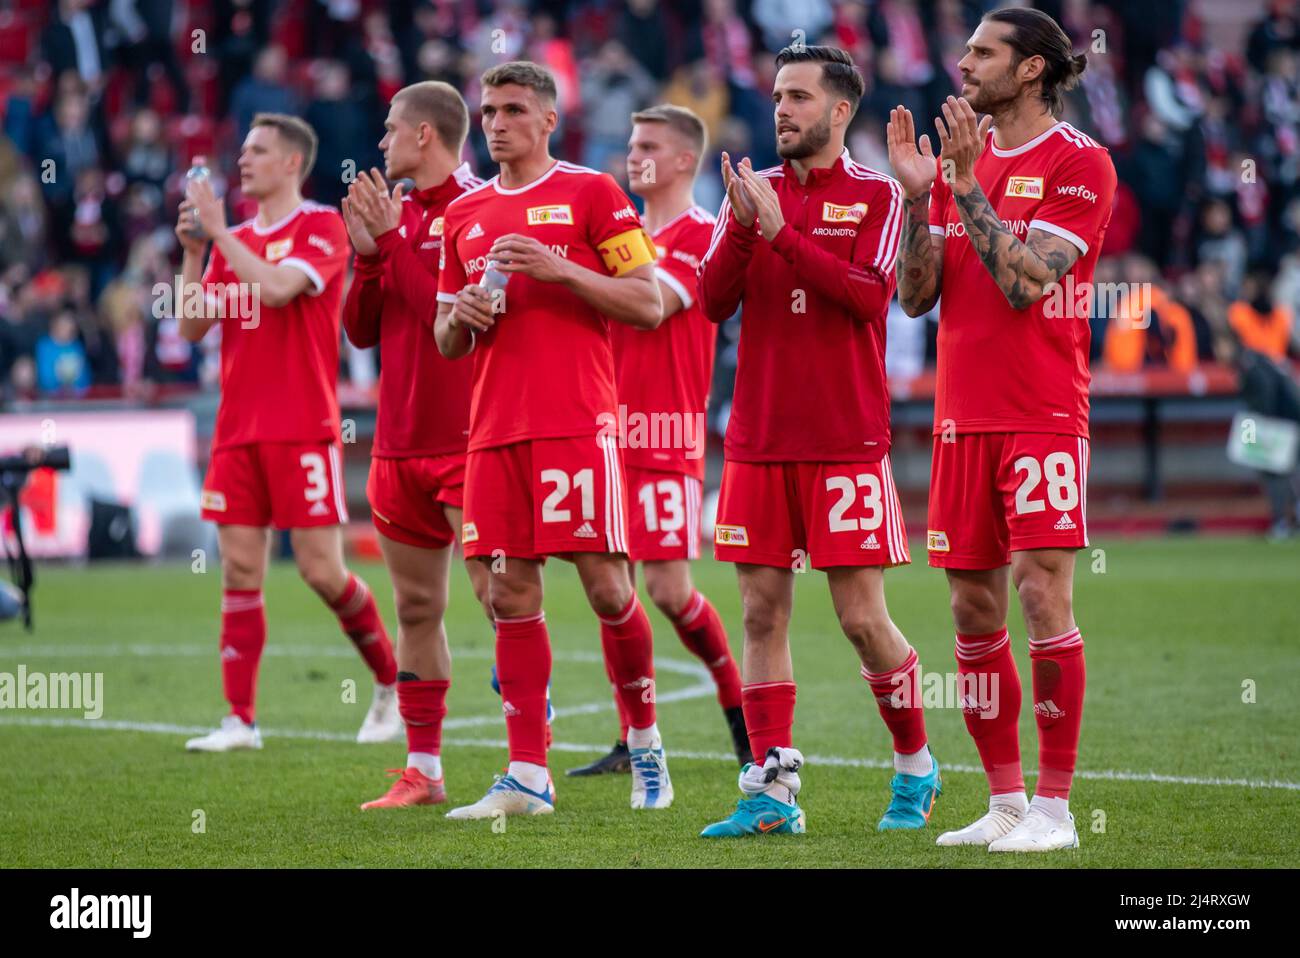 Berlin, Germany. 17th Apr, 2022. Soccer: Bundesliga, 1. FC Union Berlin - Eintracht Frankfurt, Matchday 30, An der Alten Försterei. Berlin's Grischa Prömel (l-r), Niko Gießelmann and Christopher Trimmel thank the crowd after the win. Credit: Andreas Gora/dpa - IMPORTANT NOTE: In accordance with the requirements of the DFL Deutsche Fußball Liga and the DFB Deutscher Fußball-Bund, it is prohibited to use or have used photographs taken in the stadium and/or of the match in the form of sequence pictures and/or video-like photo series./dpa/Alamy Live News Stock Photo